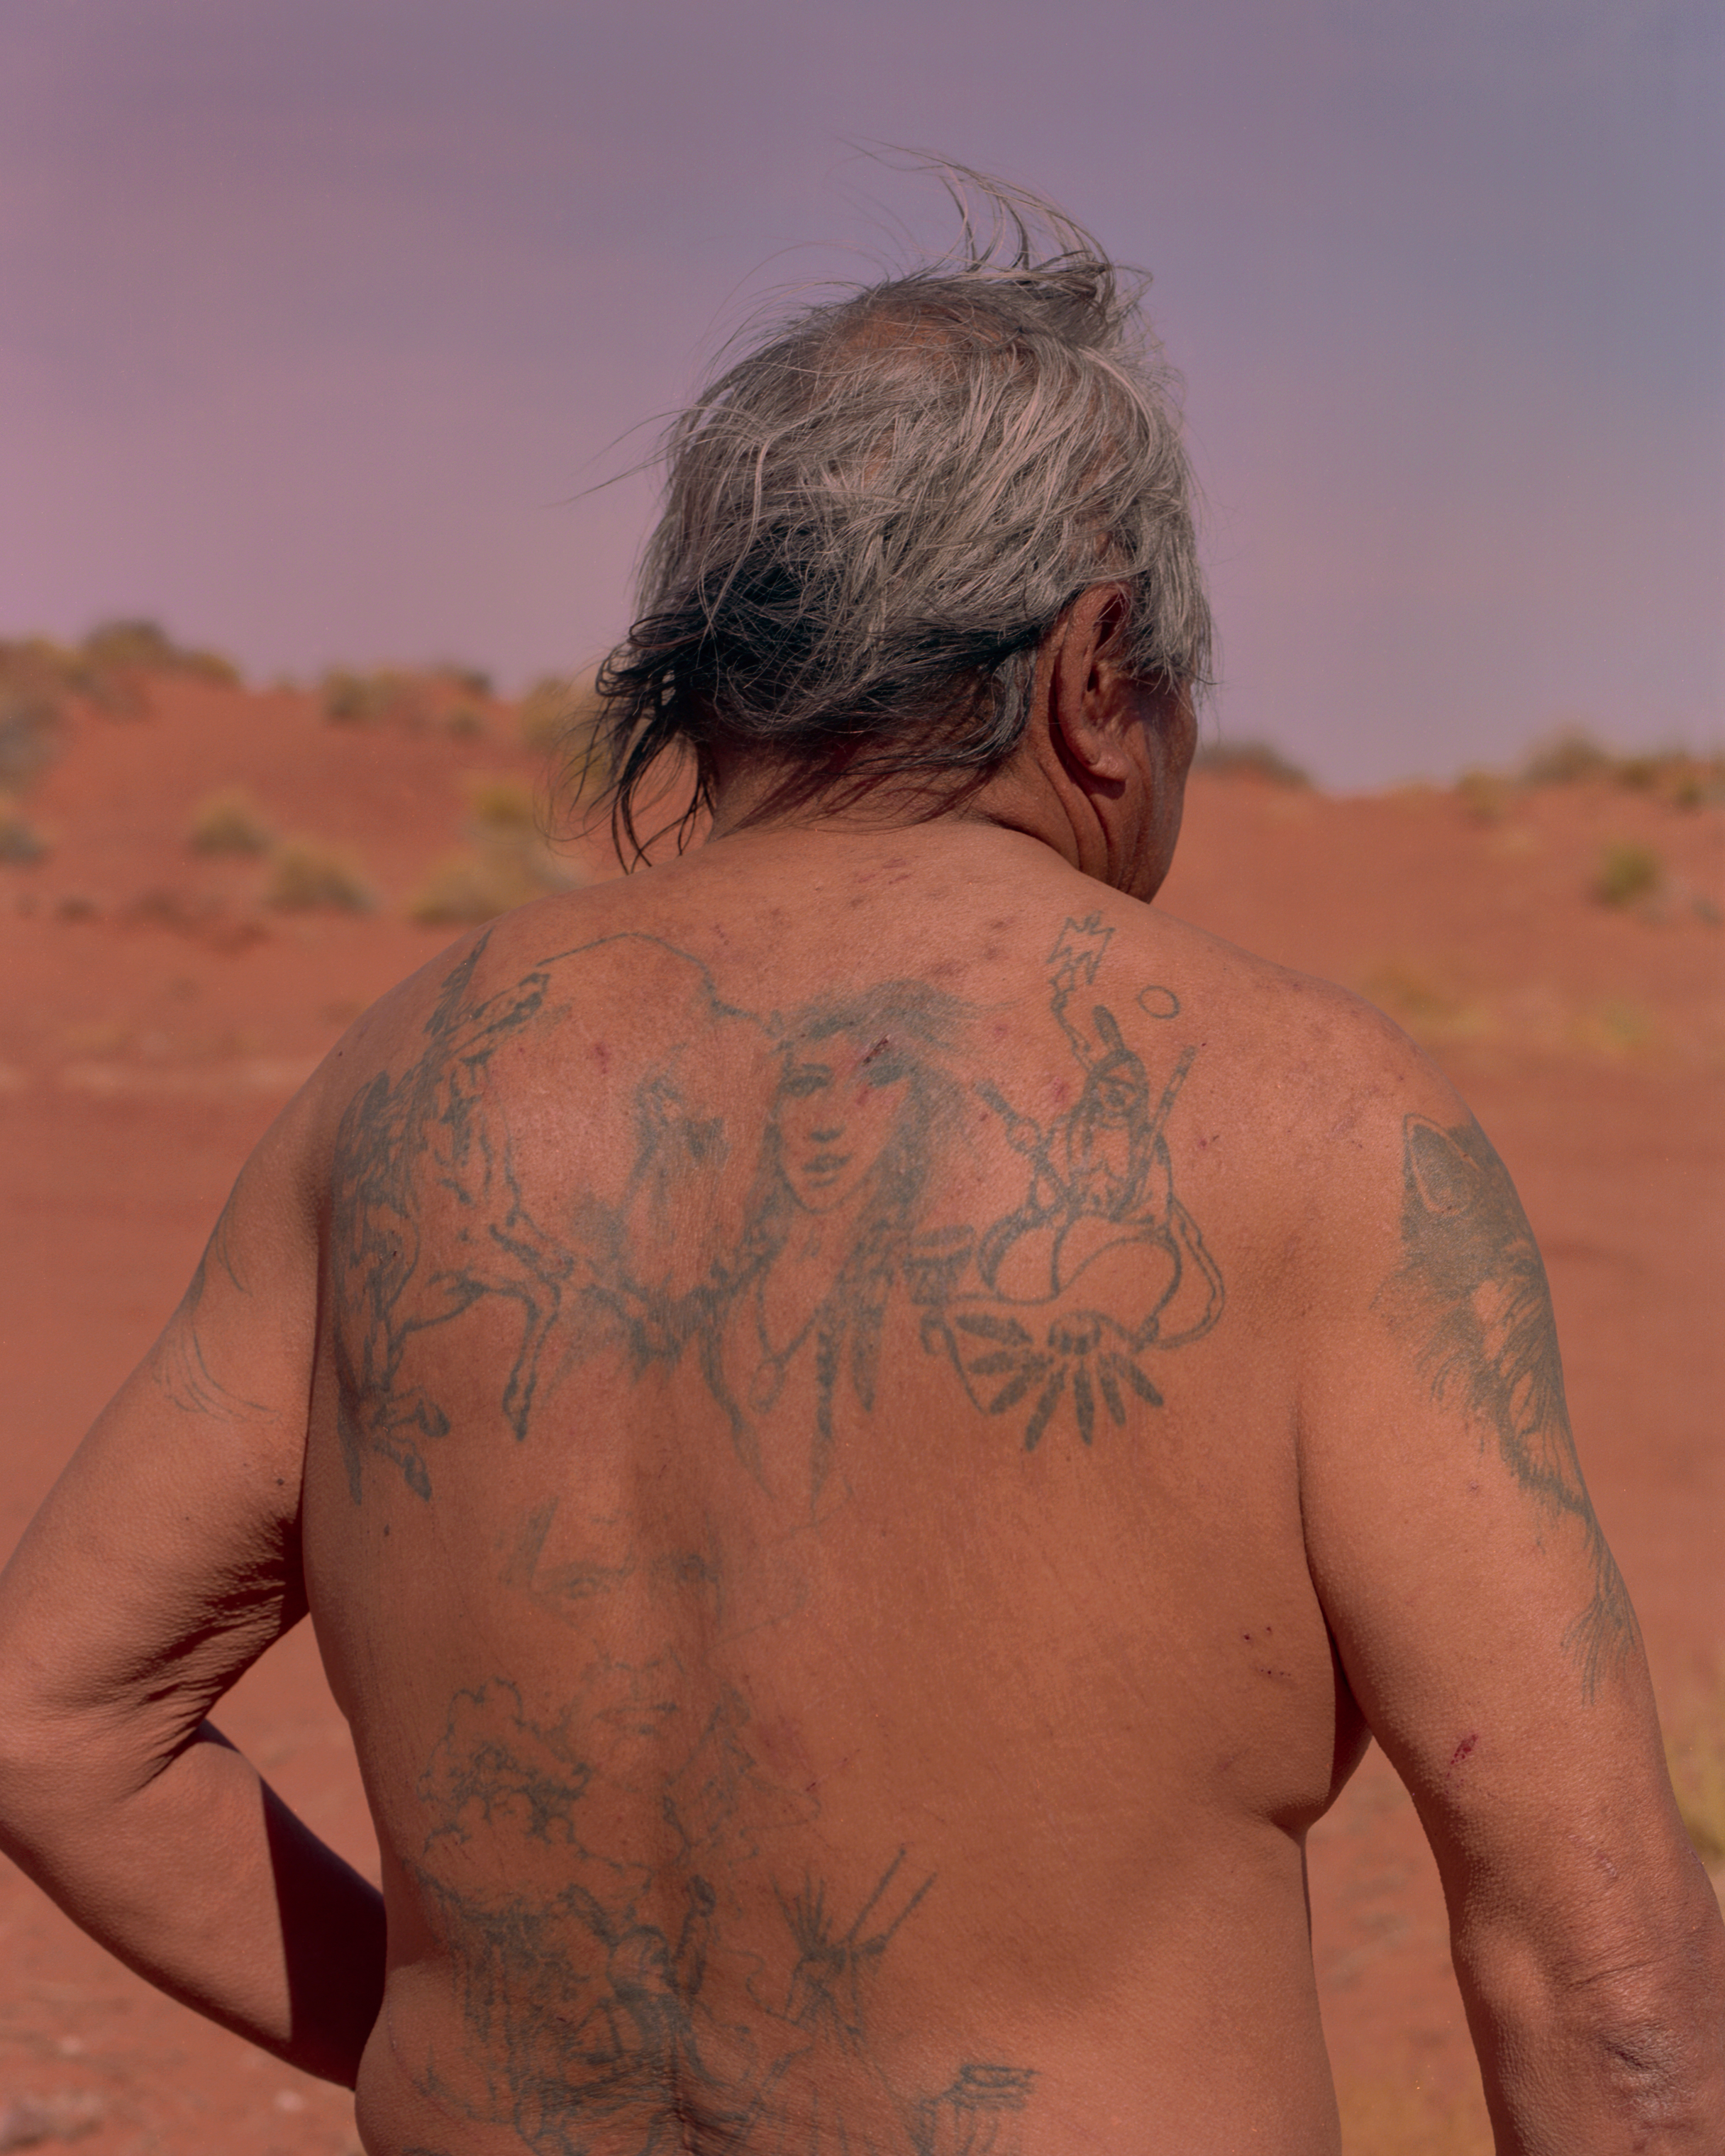 Wilson Collins is pictured at his home in Monument Valley. The tattoos covering his body include traditional Navajo imagery. Collins struggles with alcoholism, a common problem on reservations that is now being addressed by many tribes. He lives in a trailer and spends most of his days with his younger brother, who sells Navajo arts and crafts. (Ryan Shorosky for TIME)